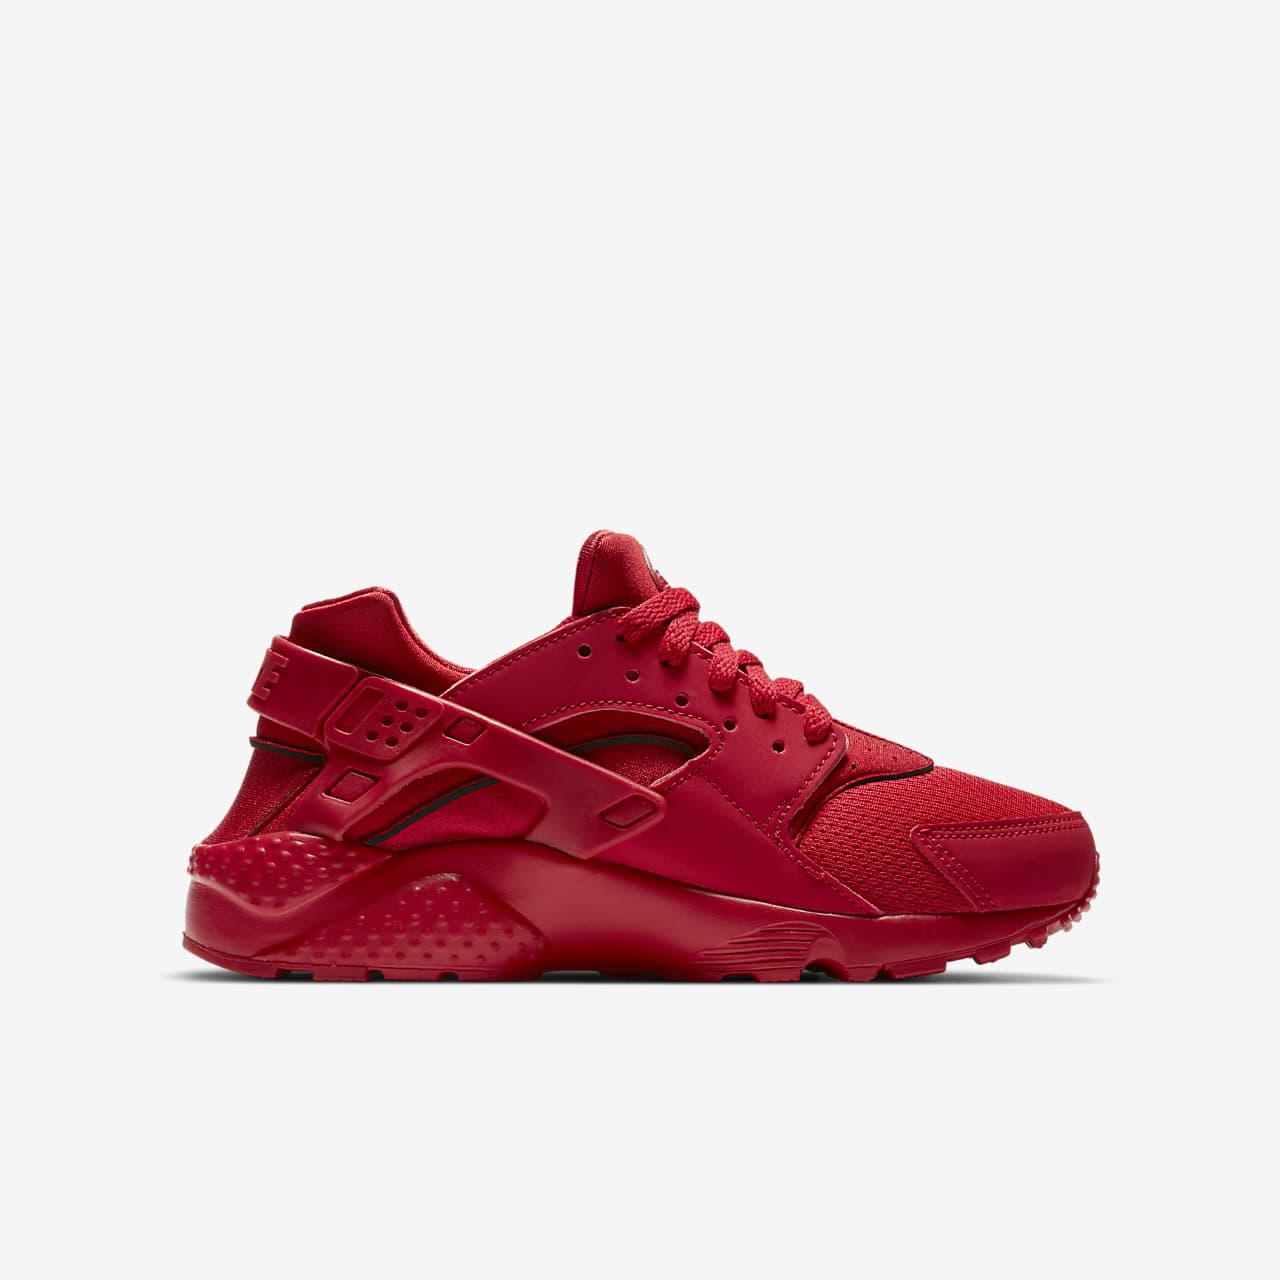 huaraches youth size 7